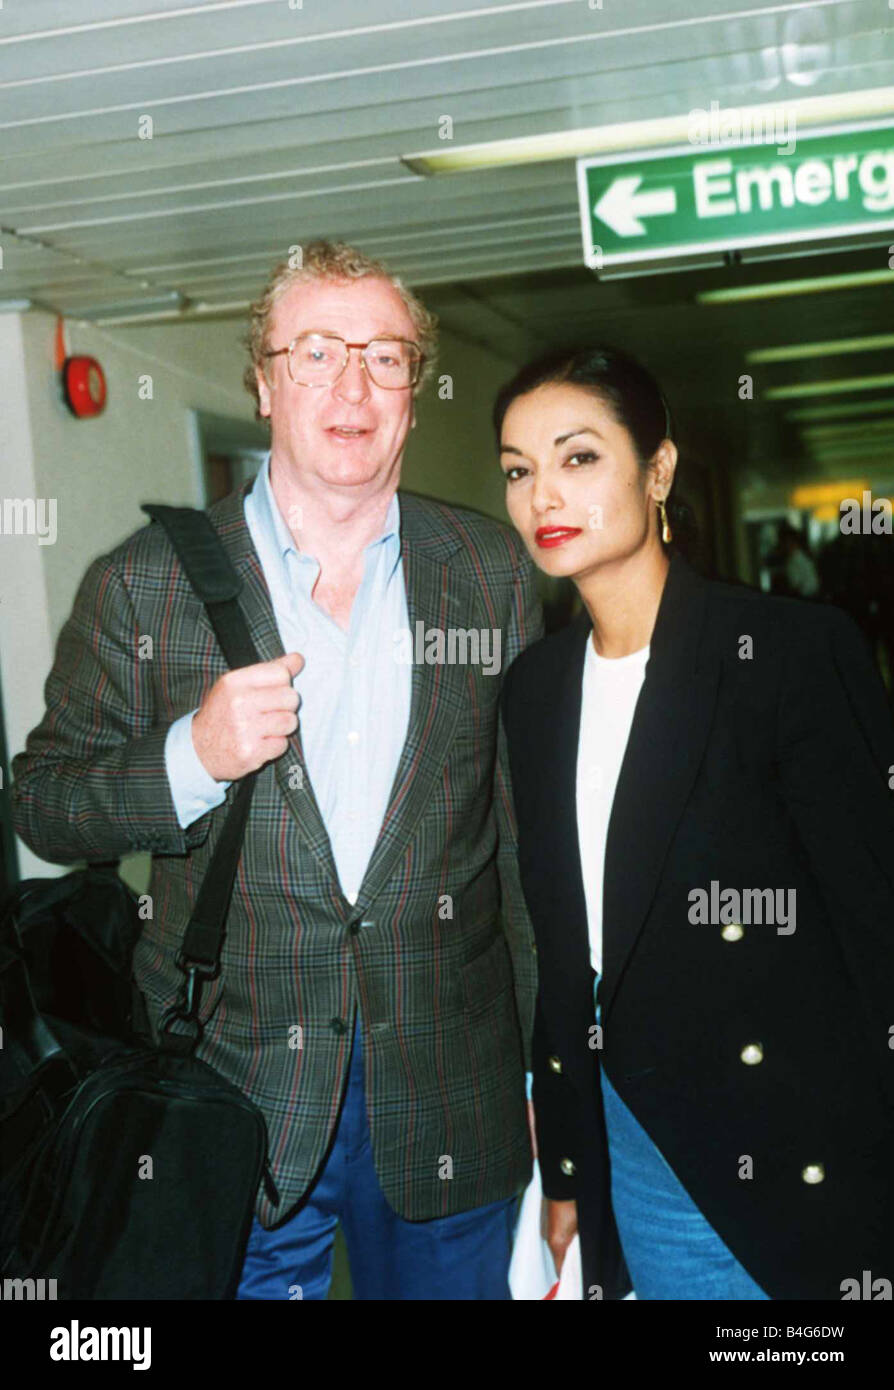 Michael Caine Film Actor with his wife at London Airport Stock Photo ...